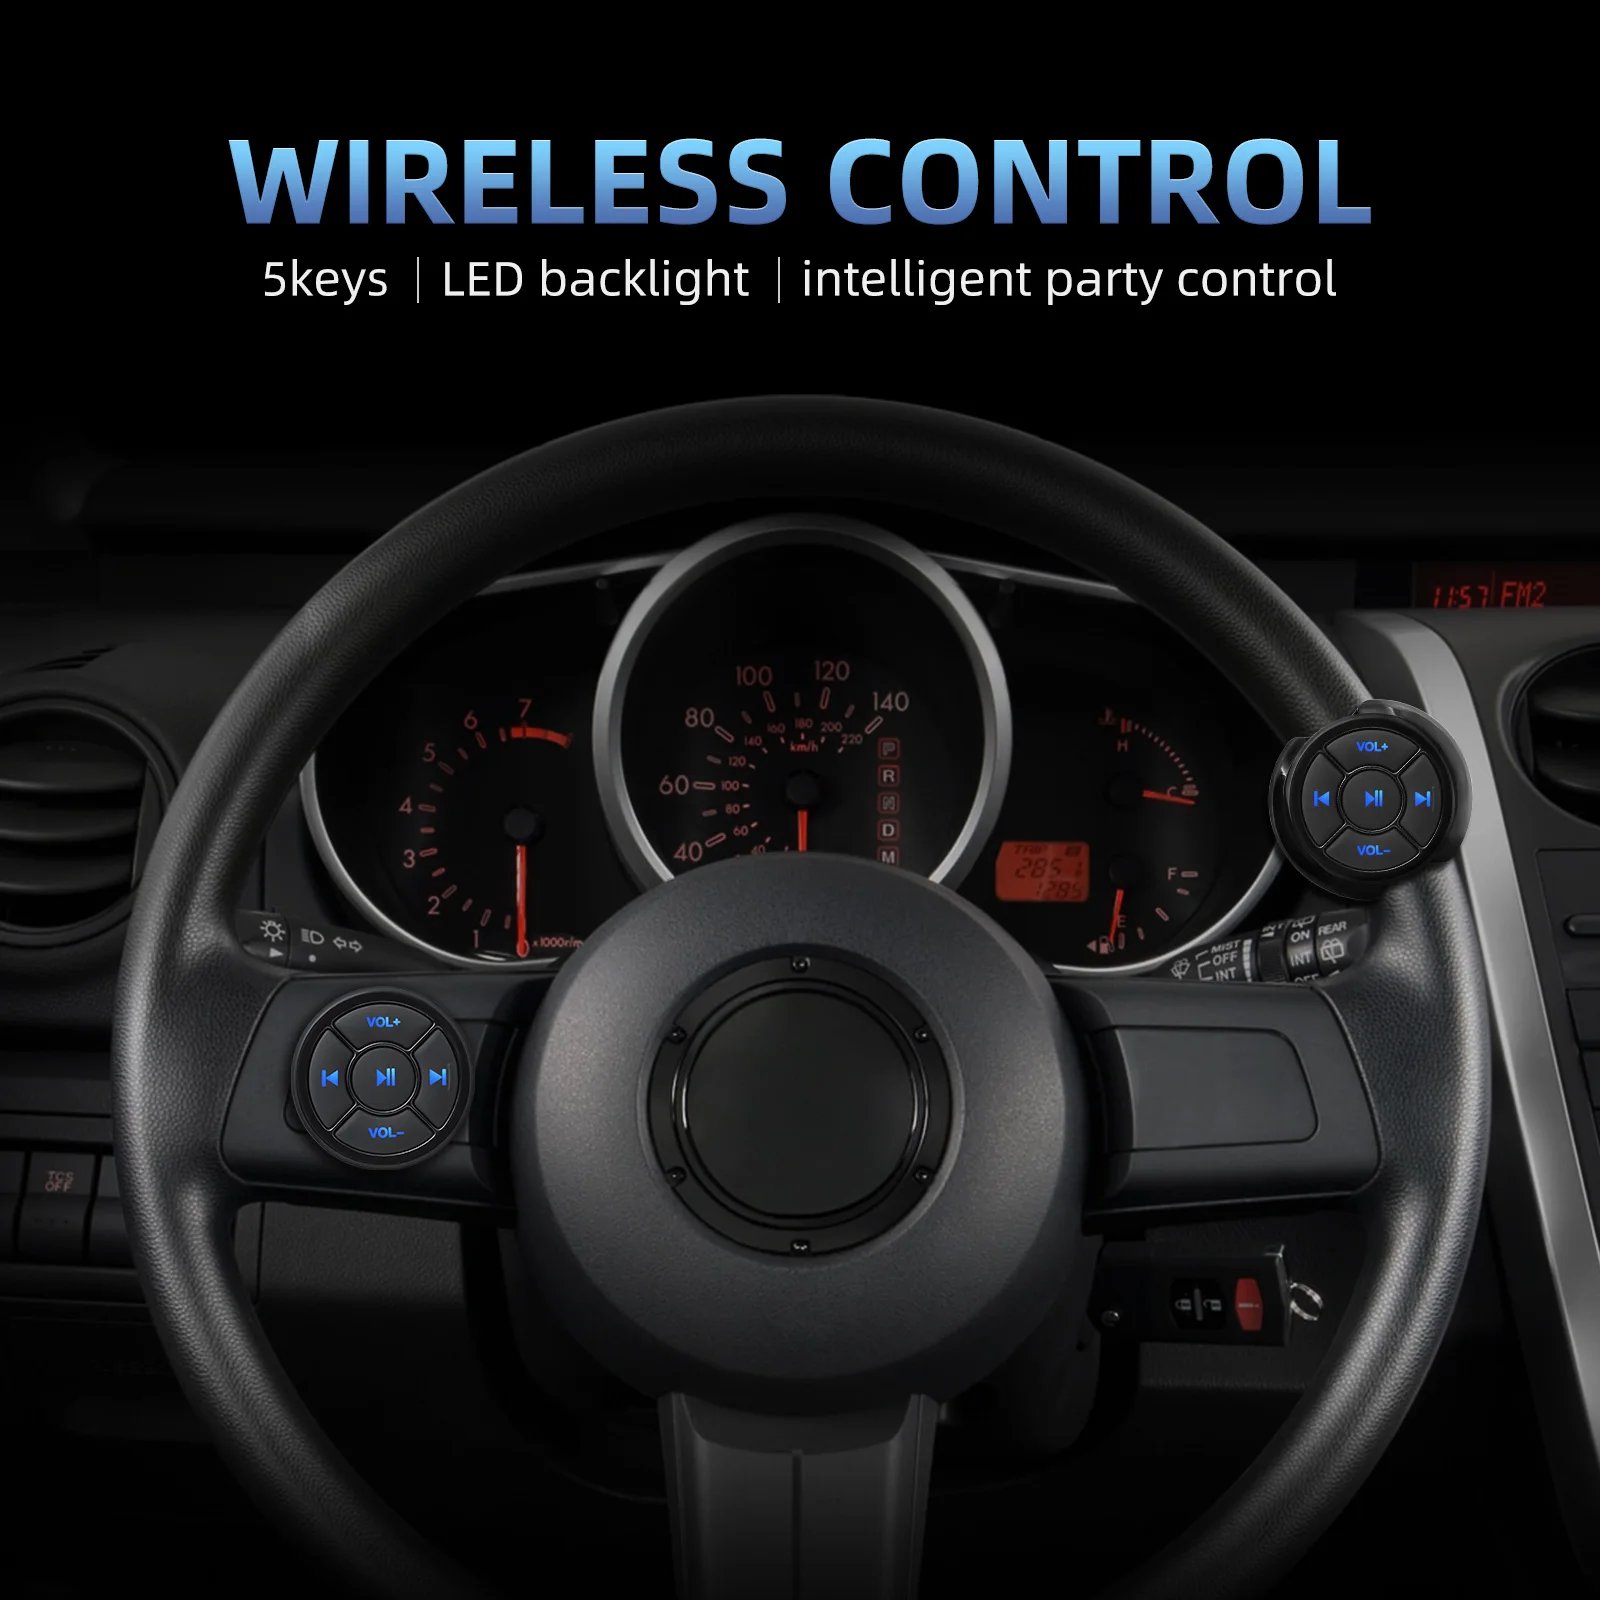 For Car Motorcycle Bike Steering Wheel Wireless Bluetooth-compatible Media Button Remote Controller 5 Keys Car DVD Music Player